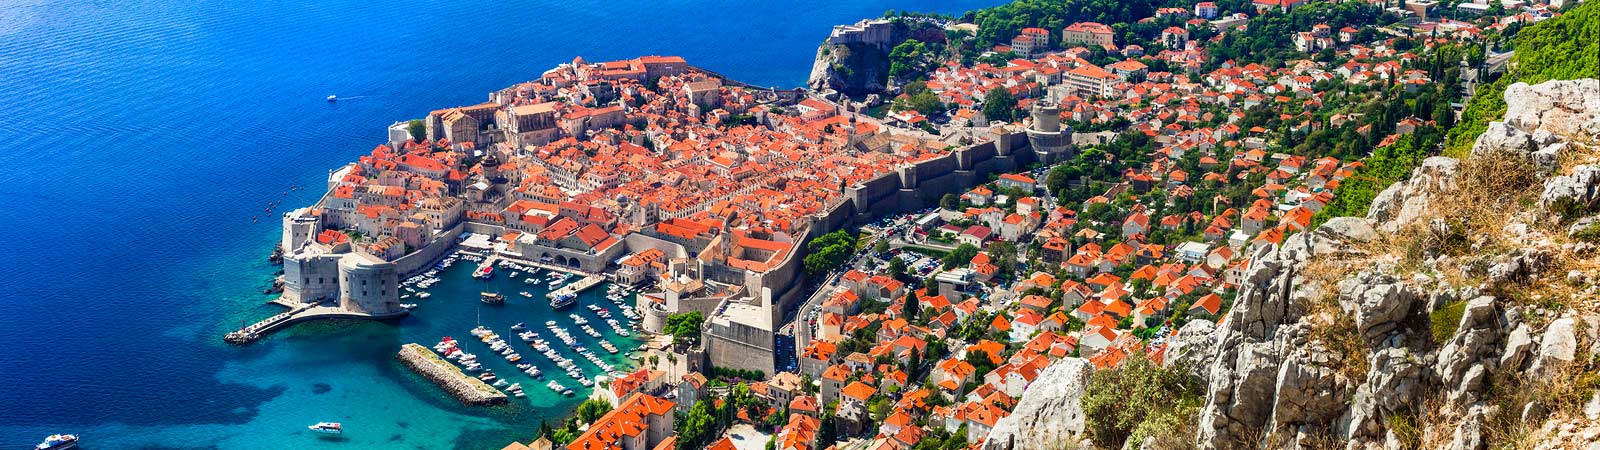 Aerial view of Dubrovnik that can be enjoyed on an escorted Croatian vacation